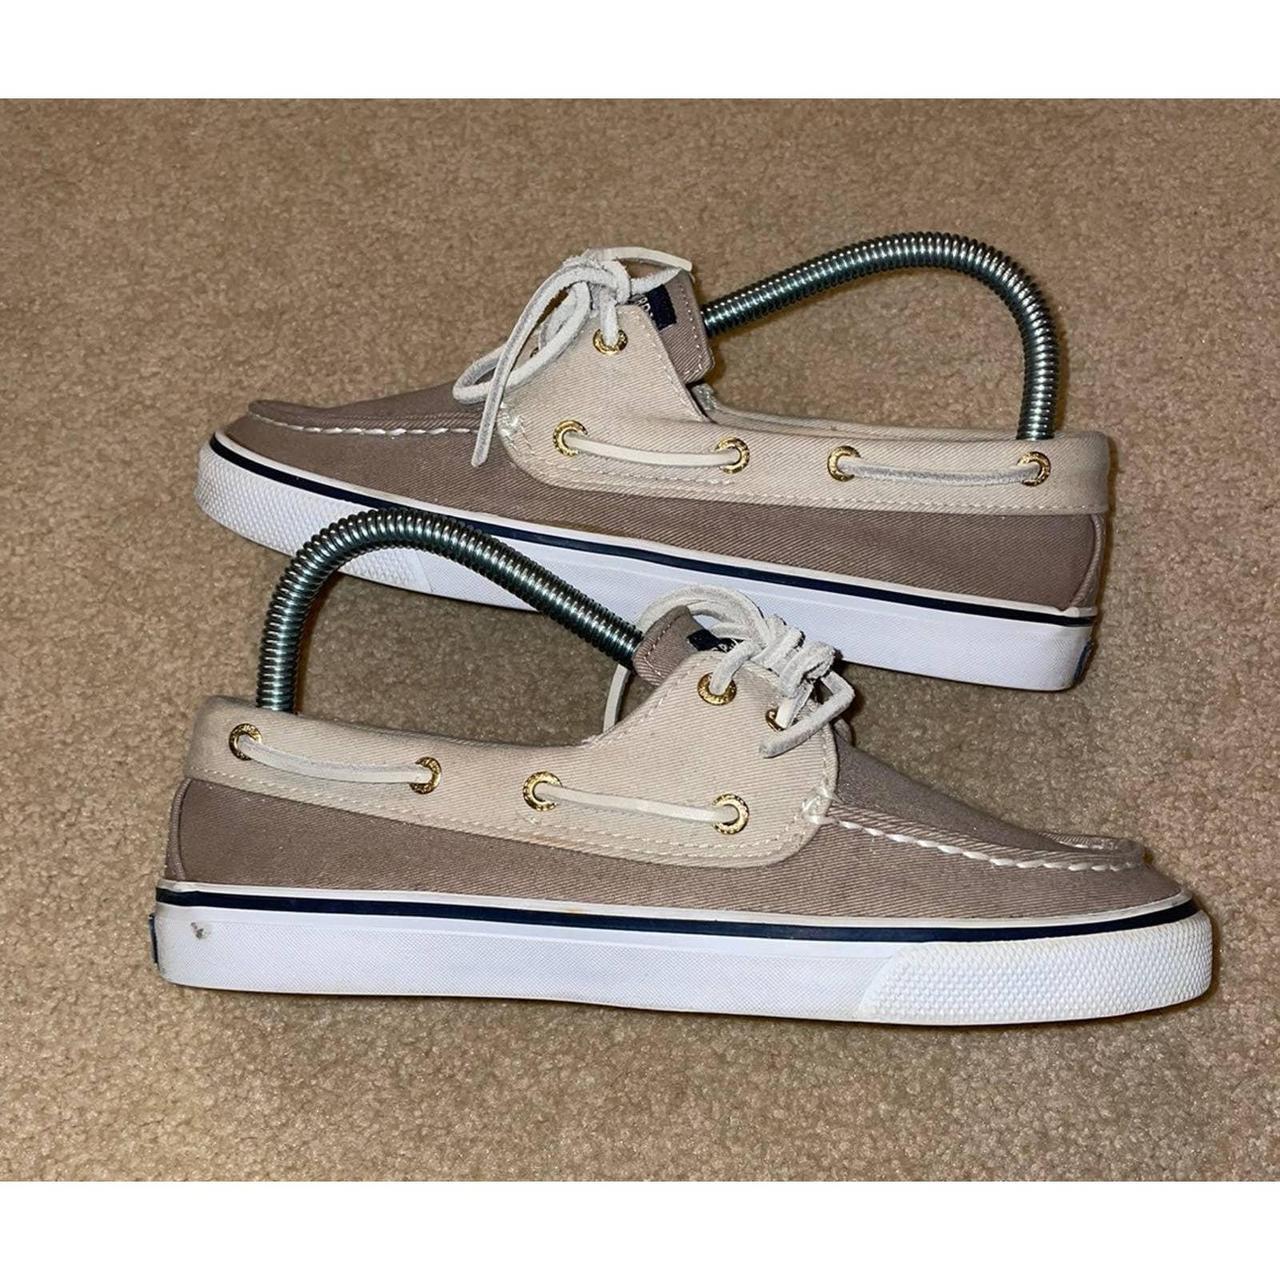 Product Image 2 - Sperry Top Sider Women's Size